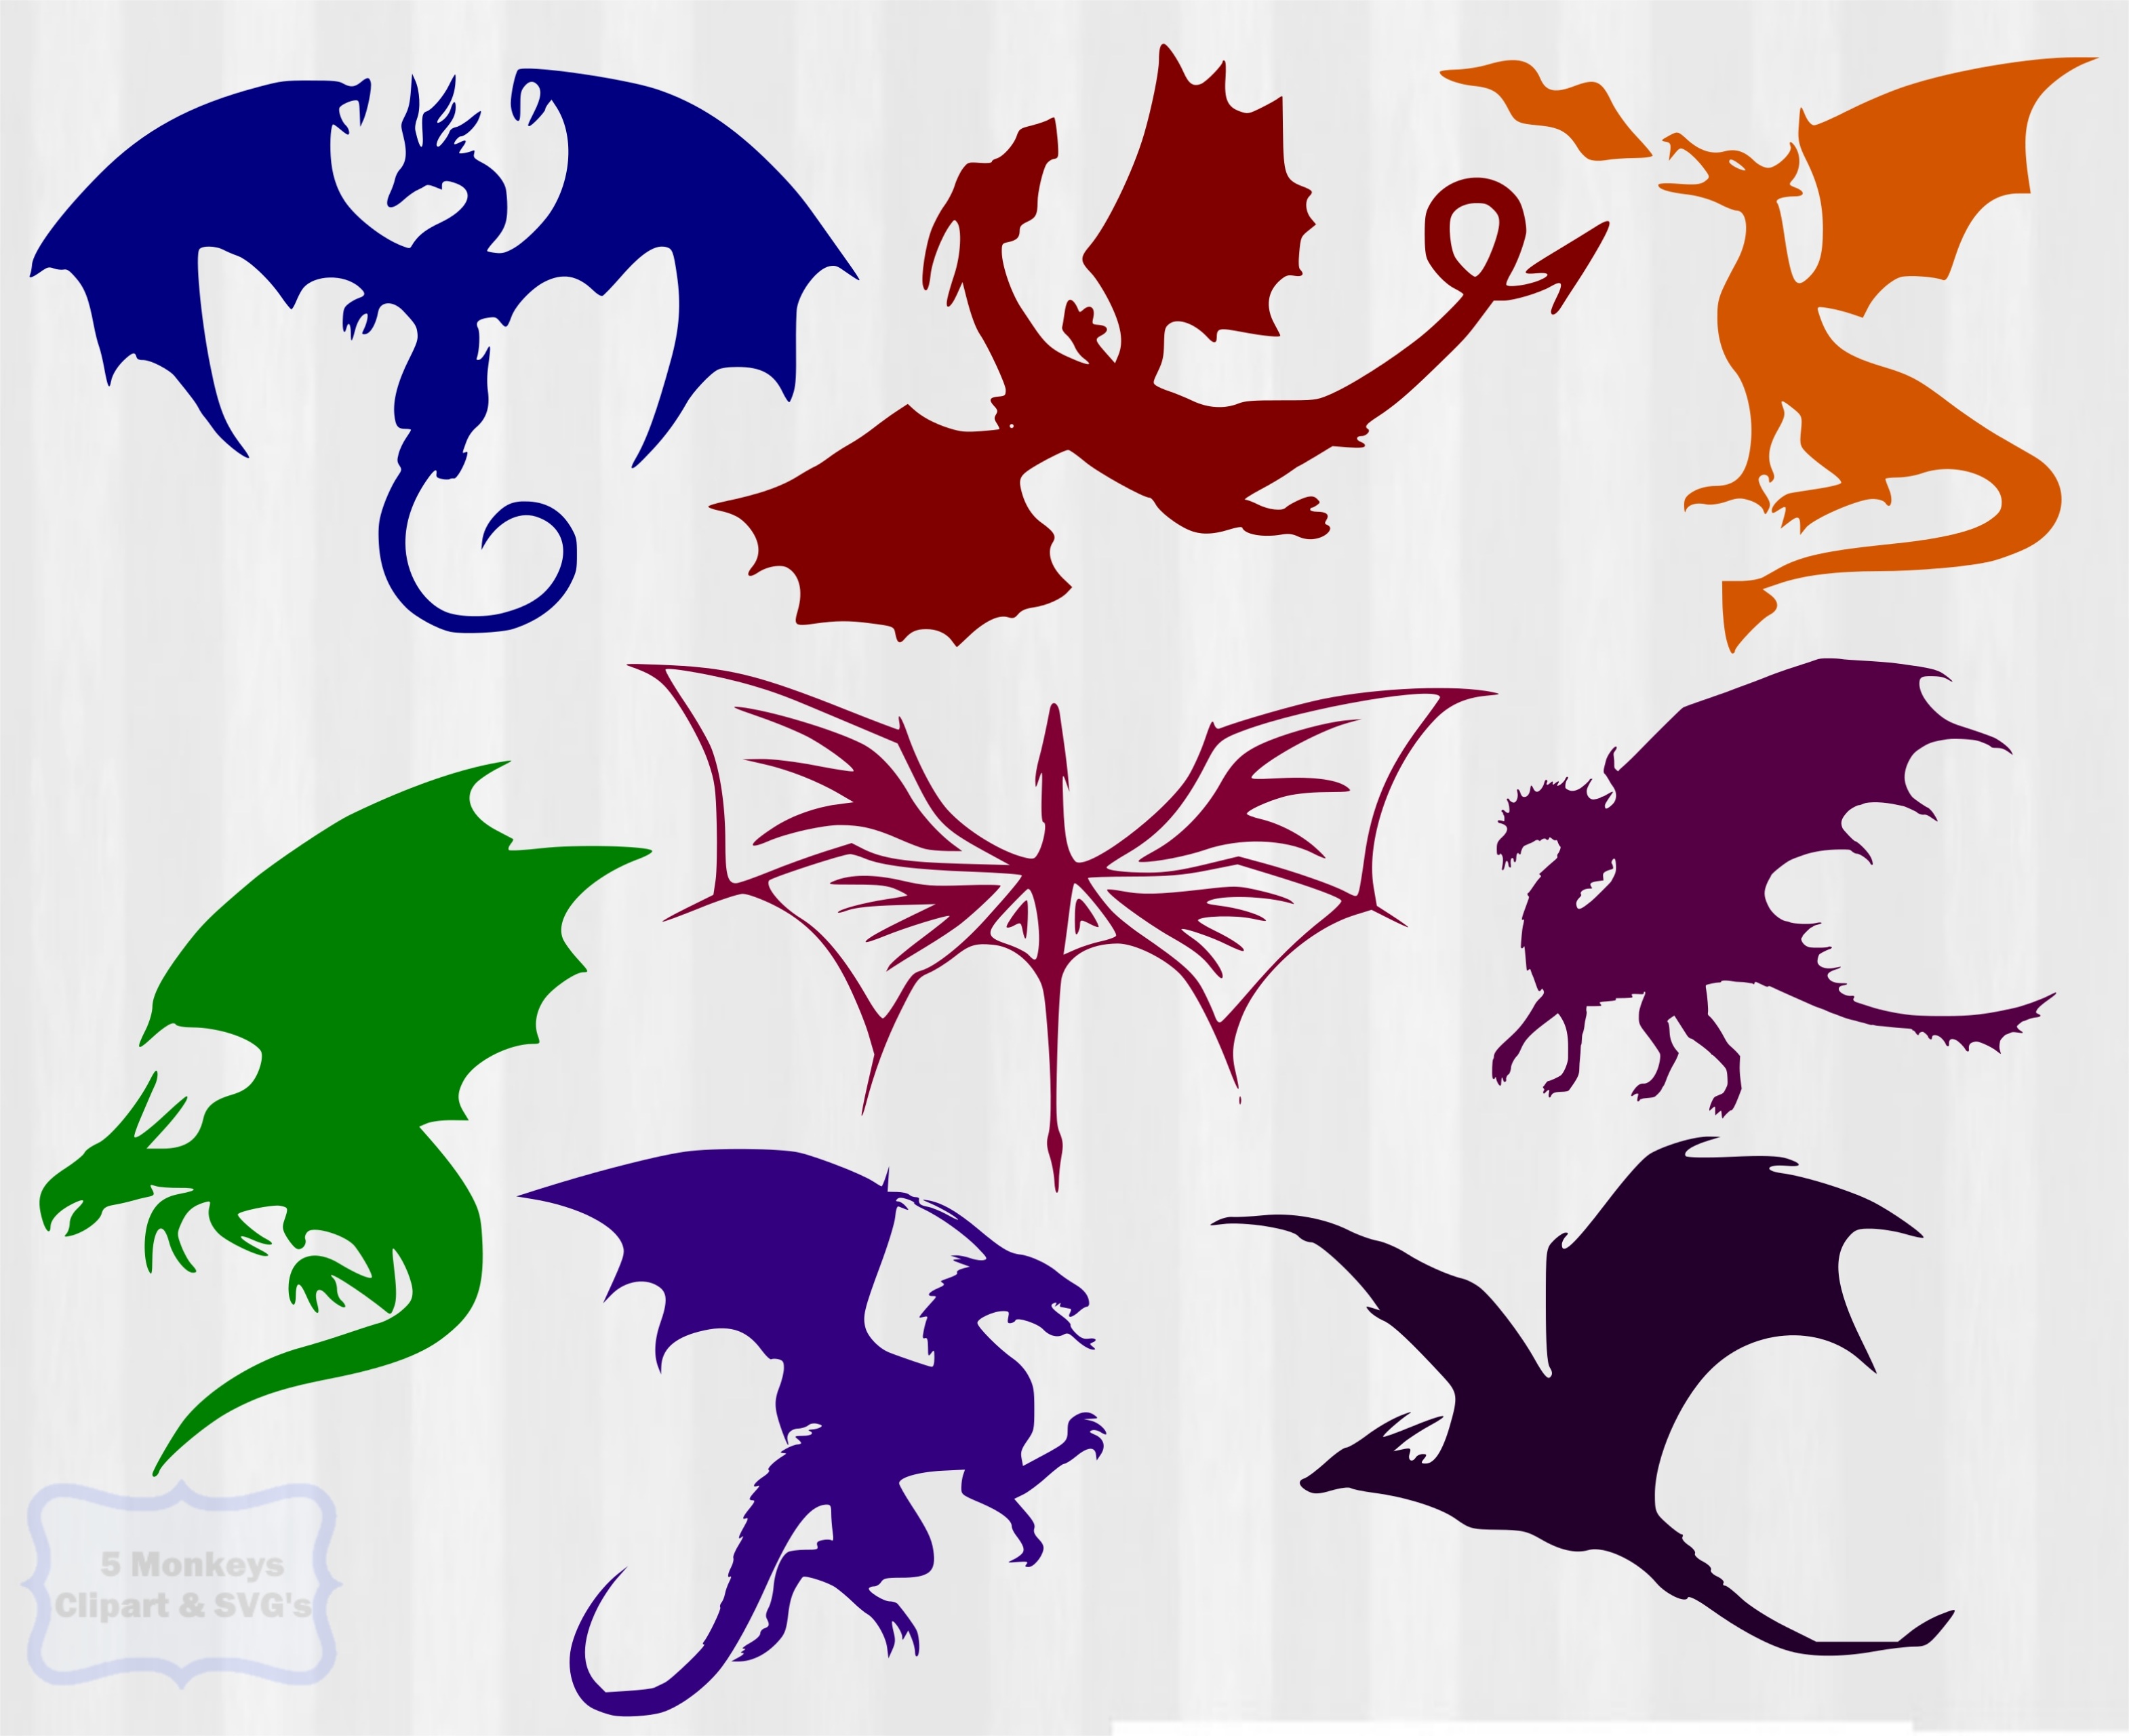 Game Of Thrones clipart #1, Download drawings